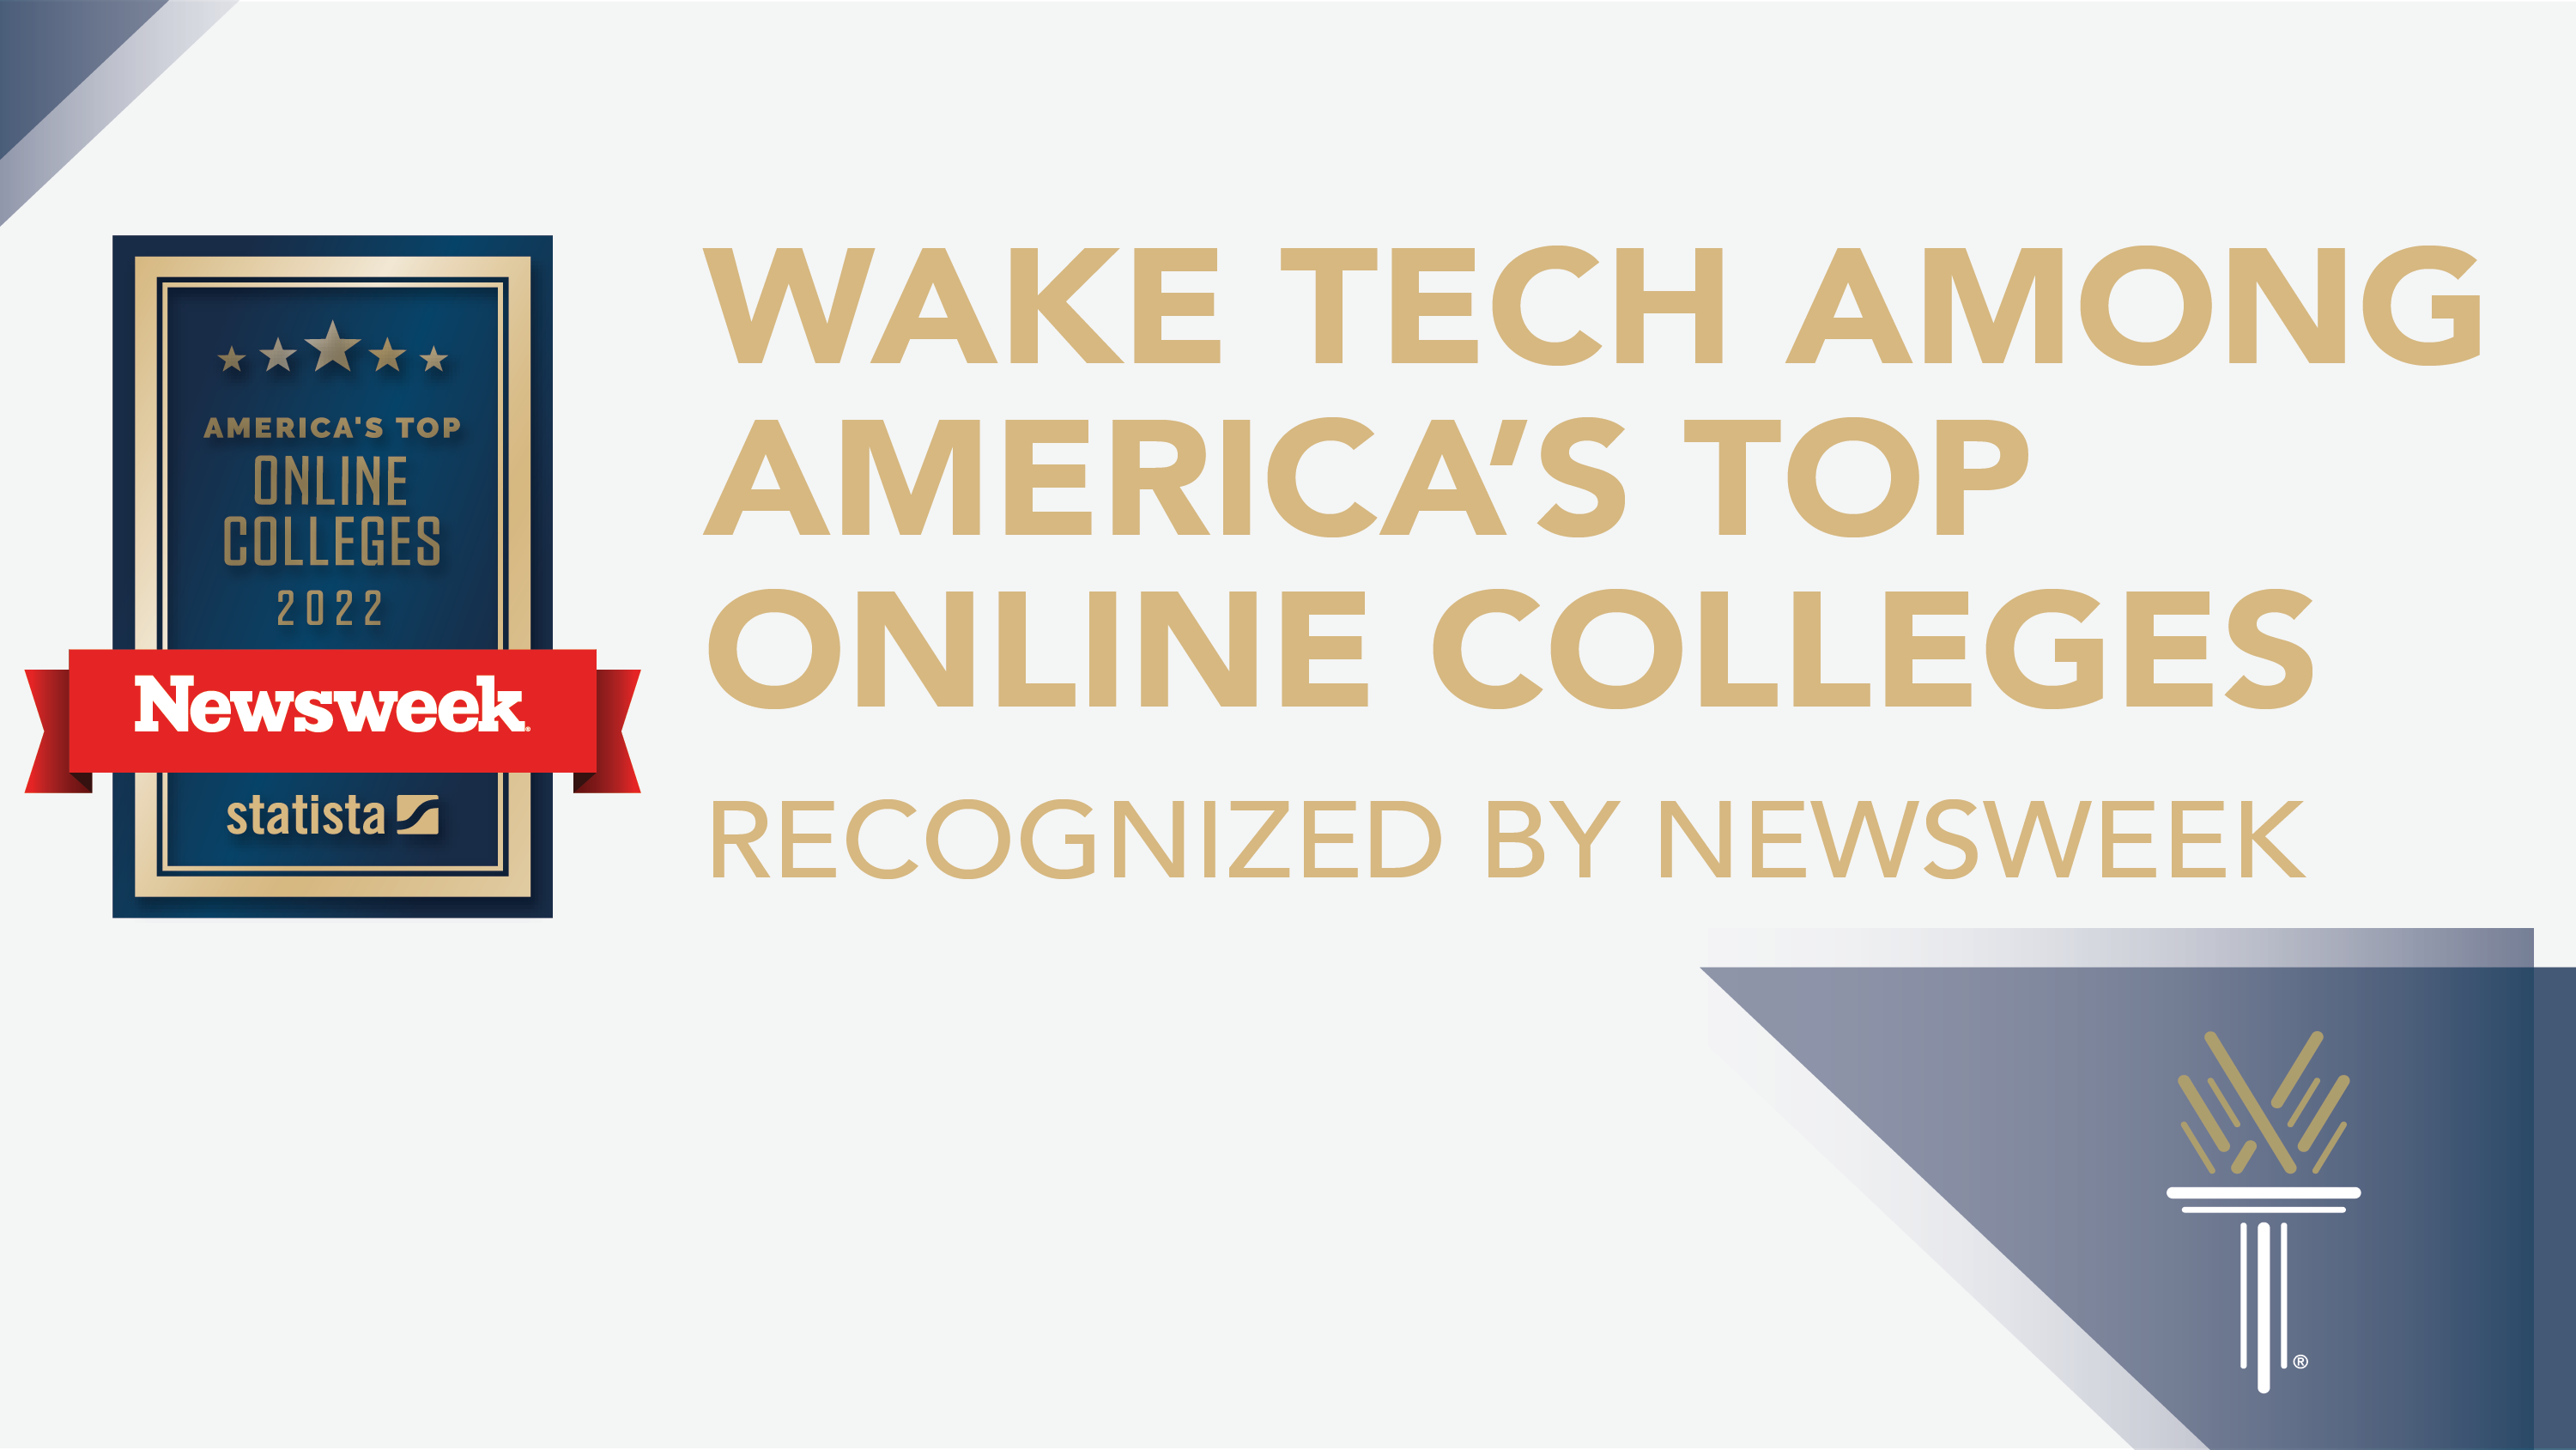 Wake Tech Among America's Top Online Colleges